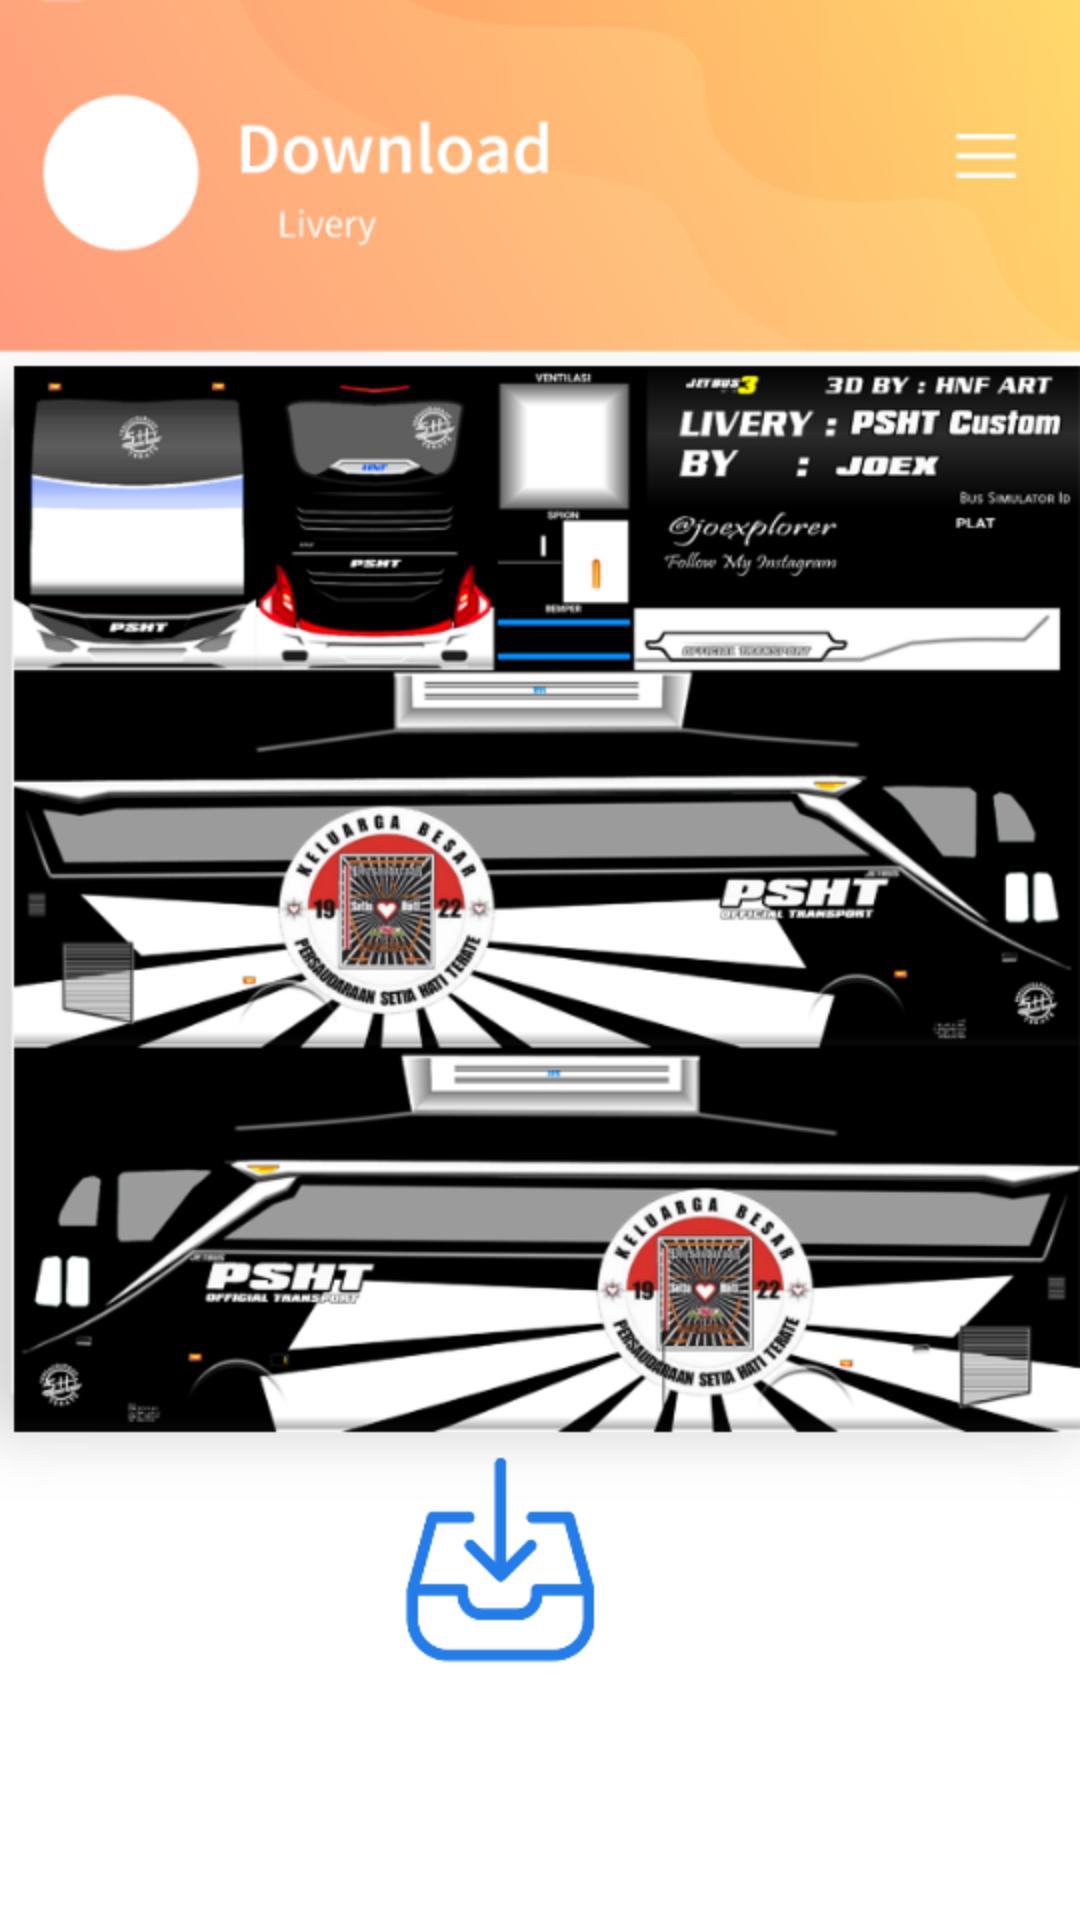 Livery Bussid Psht For Android Apk Download